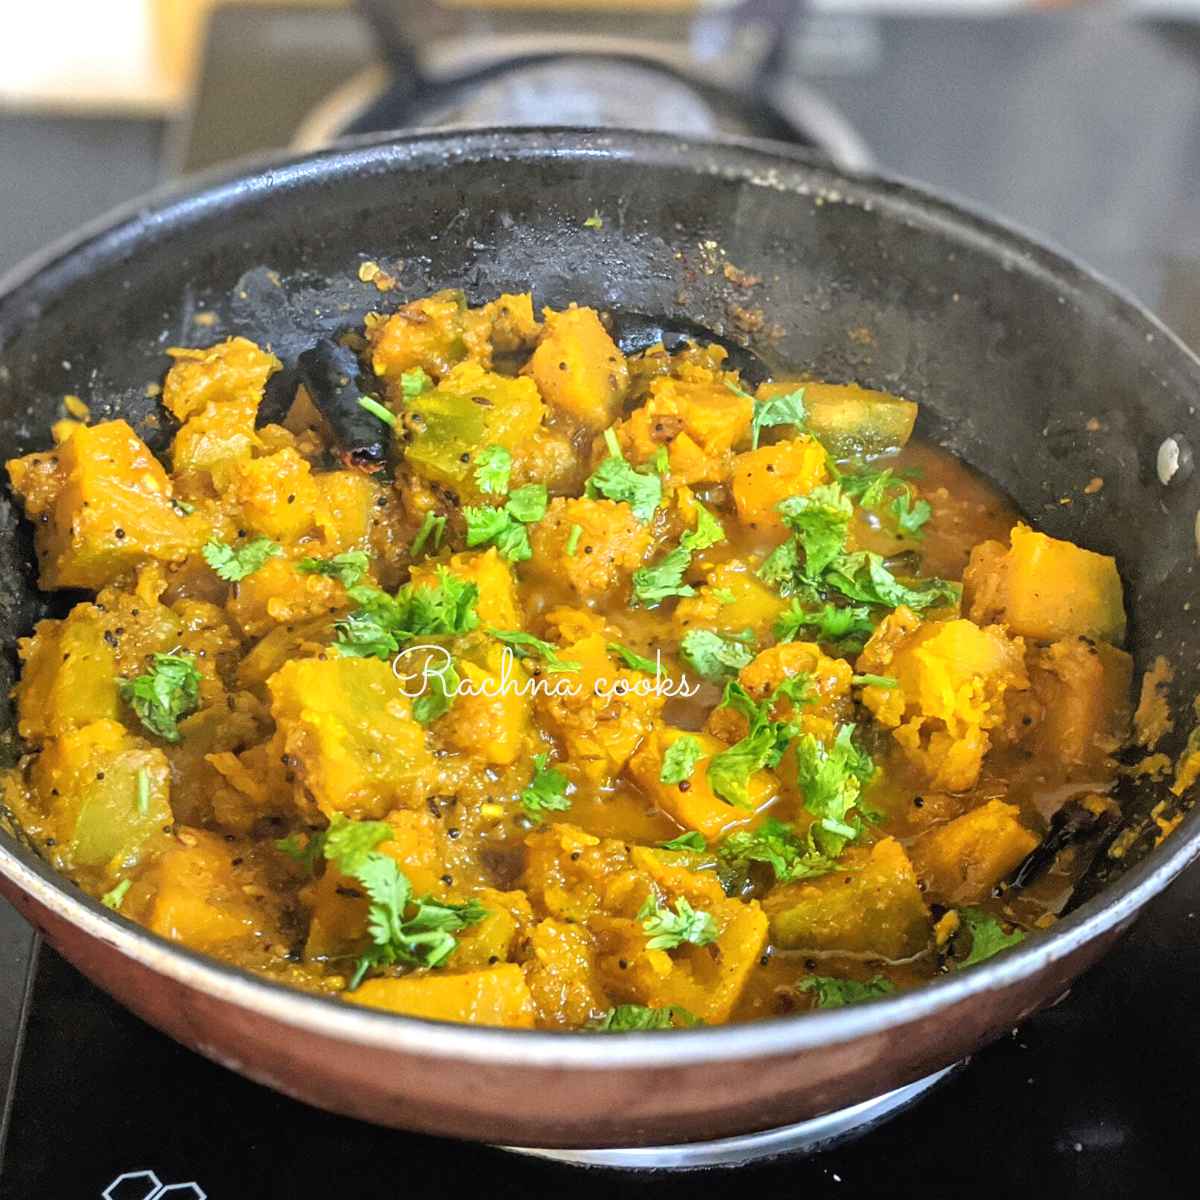 Pumpkin curry garnished with cilantro leaves in a wok